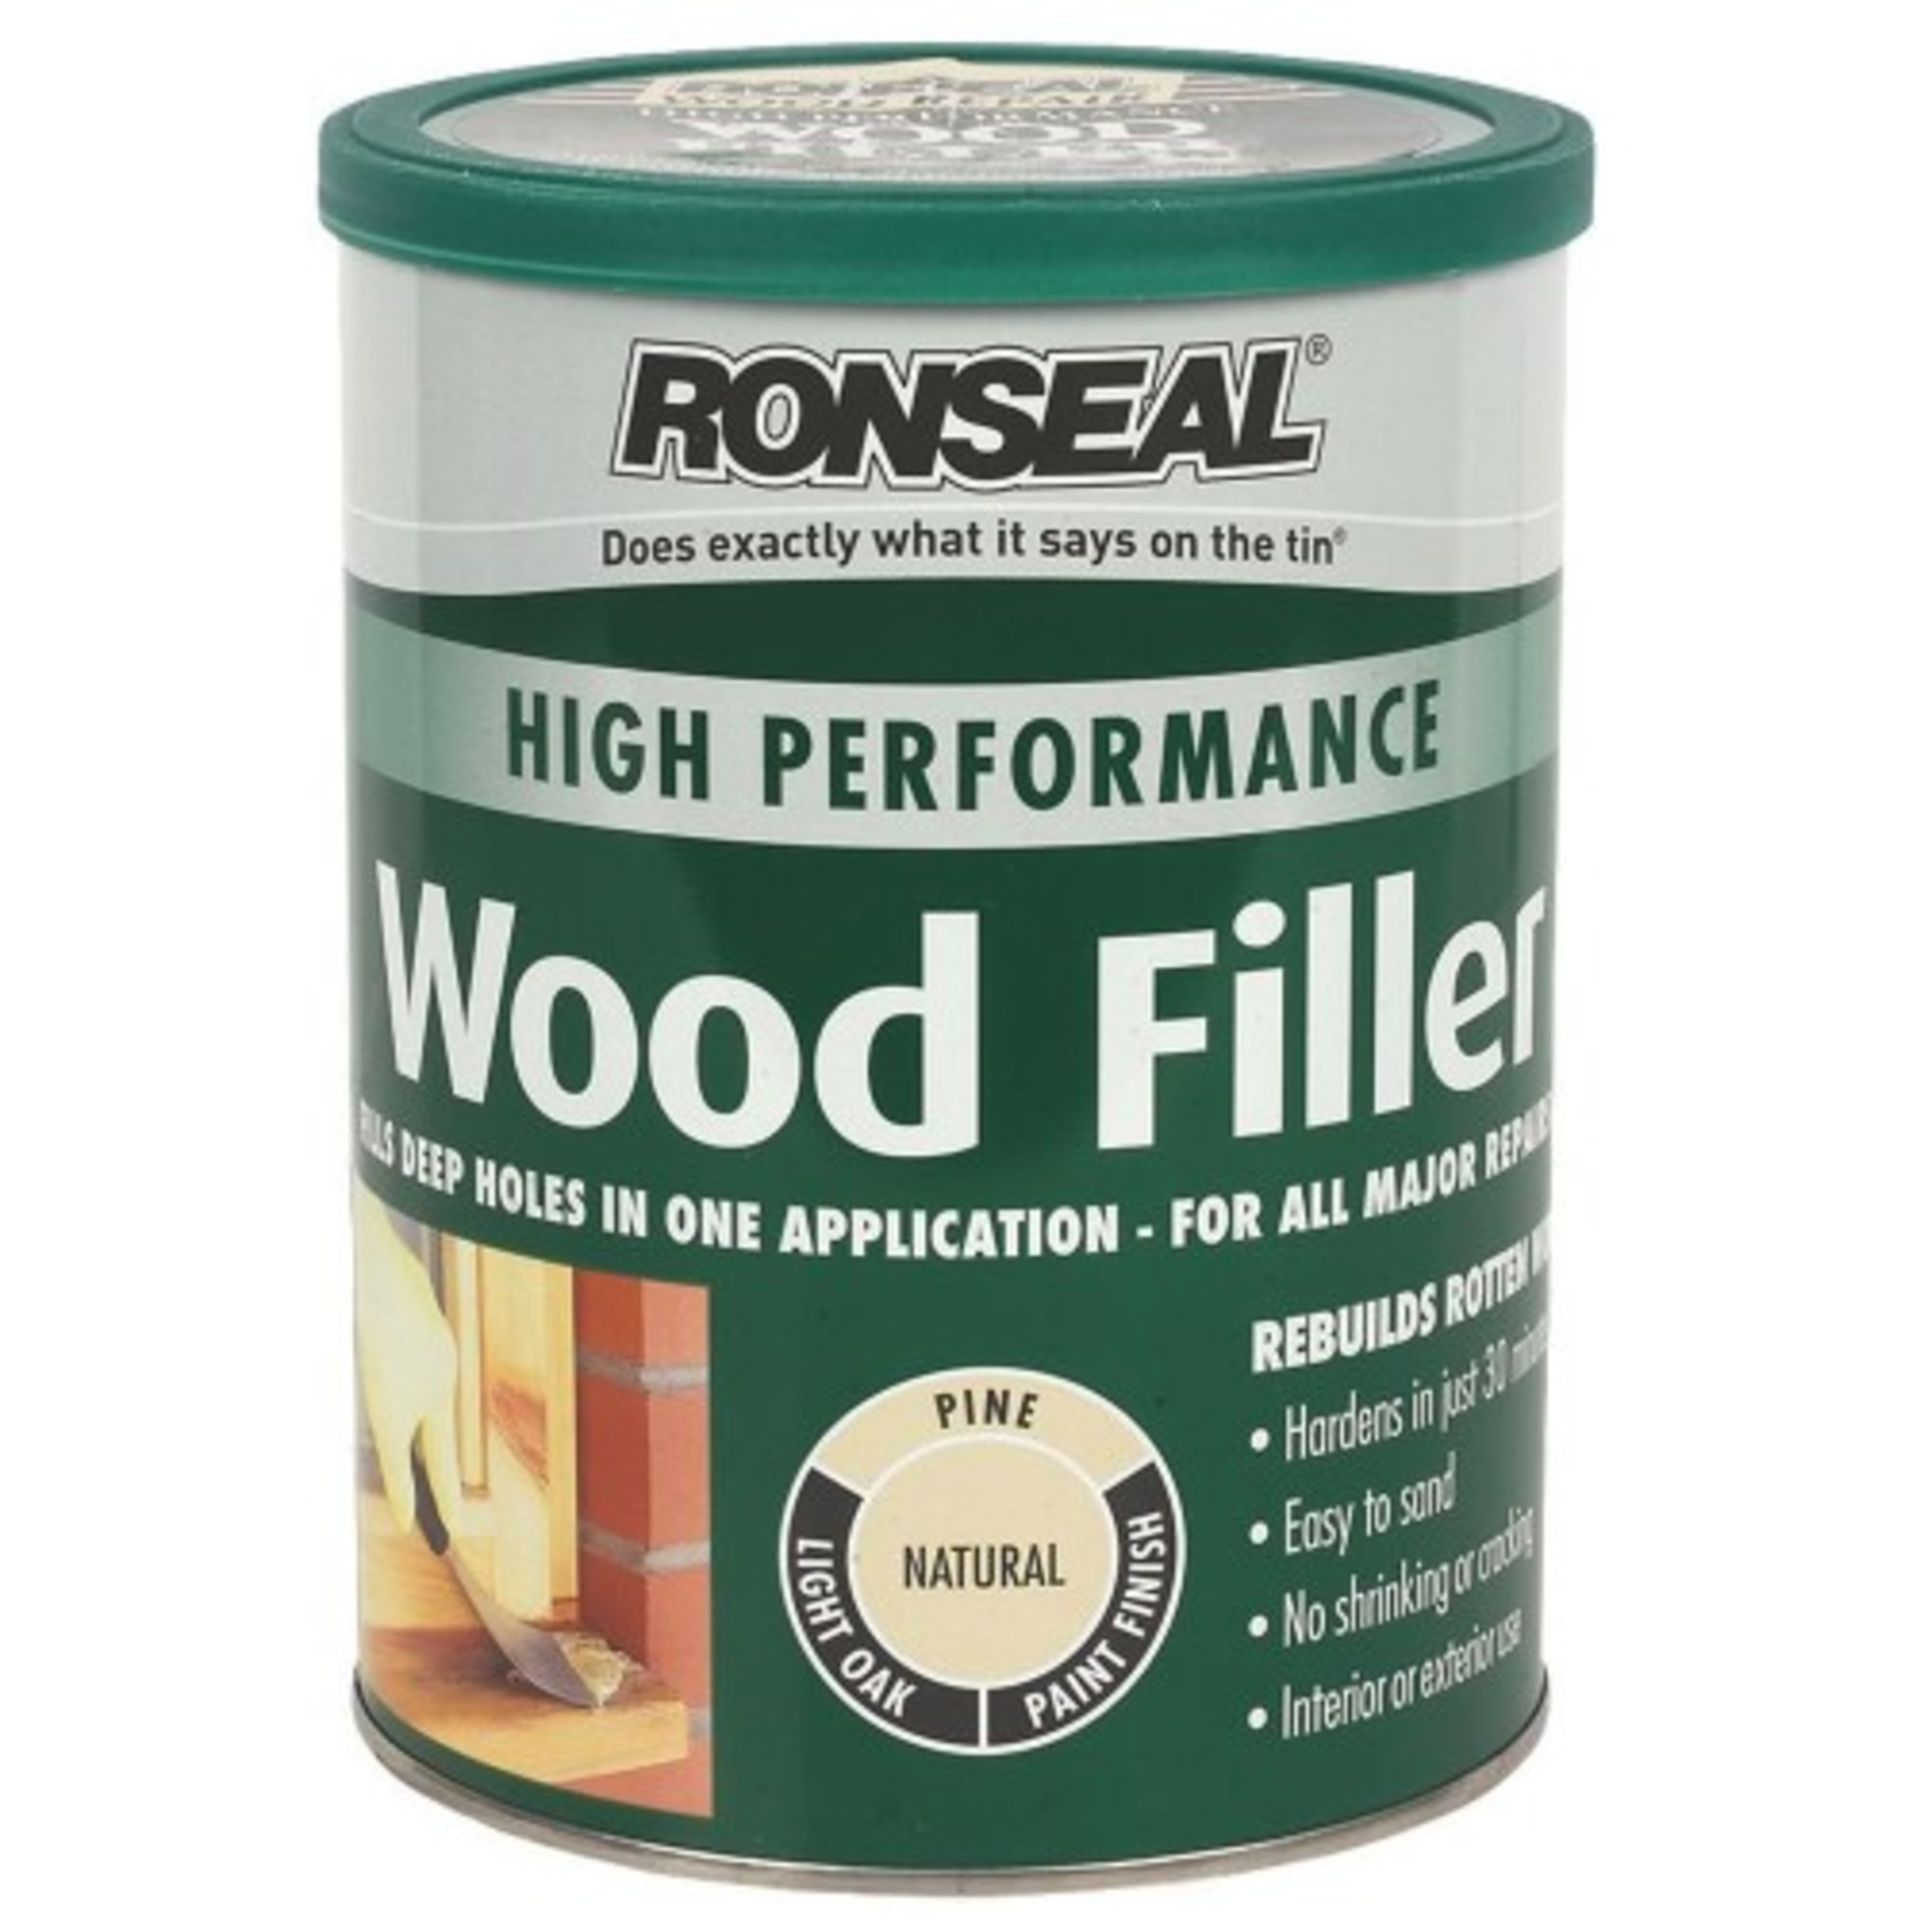 V Grade A Ronseal Wood Filler Natural 550g X 2 YOUR BID PRICE TO BE MULTIPLIED BY TWO